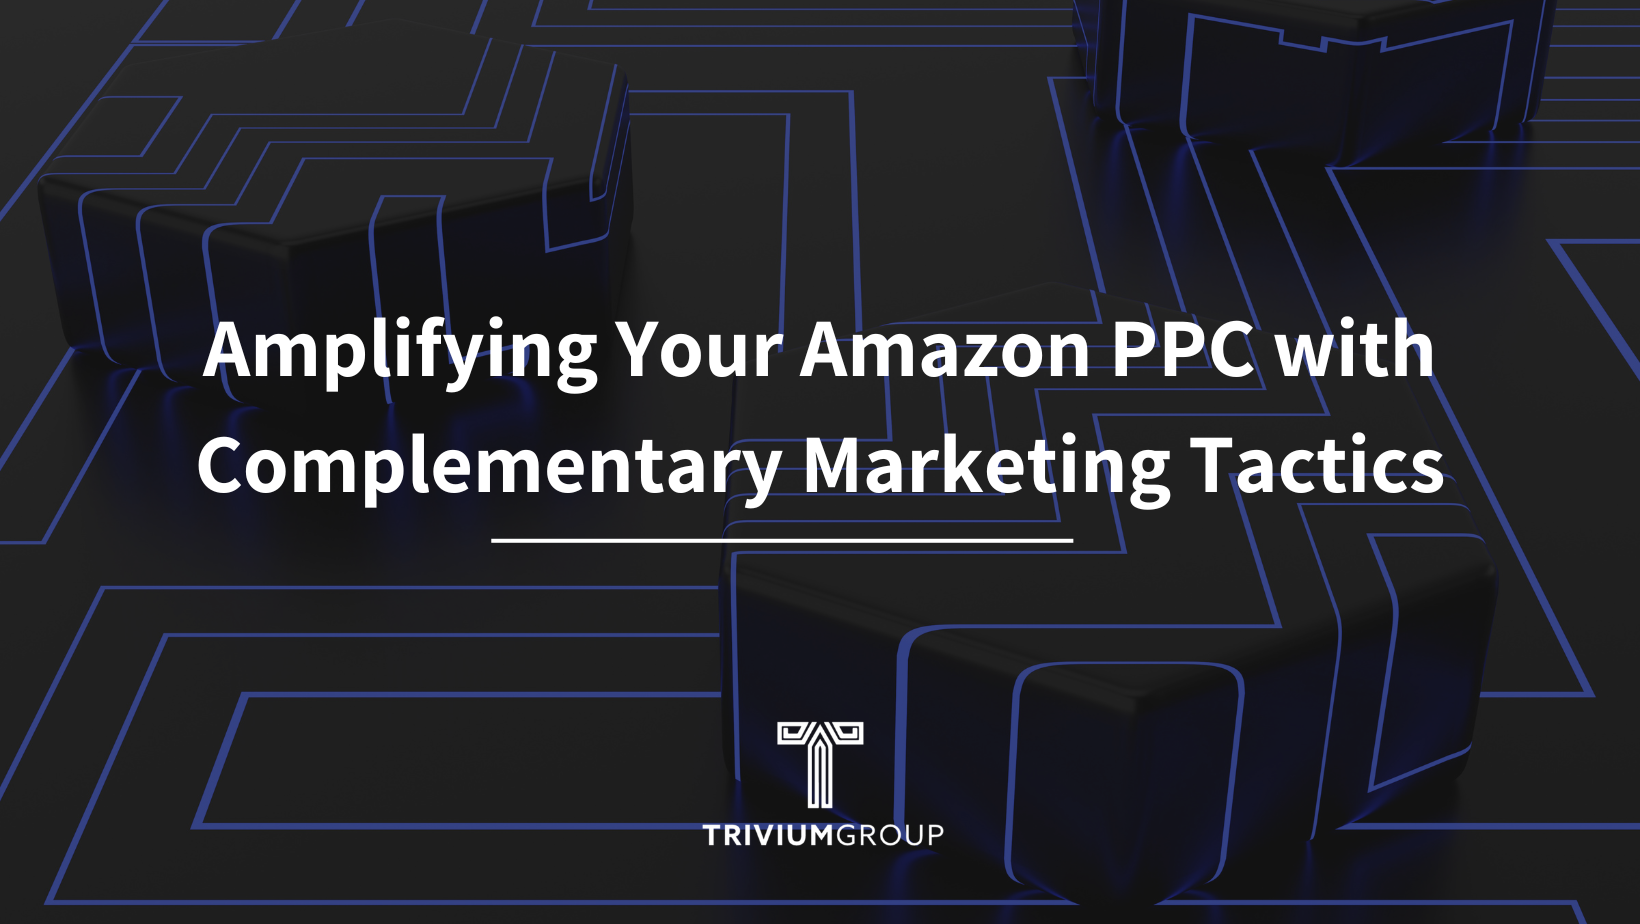 Amplifying Your Amazon PPC with Complementary Marketing Tactics